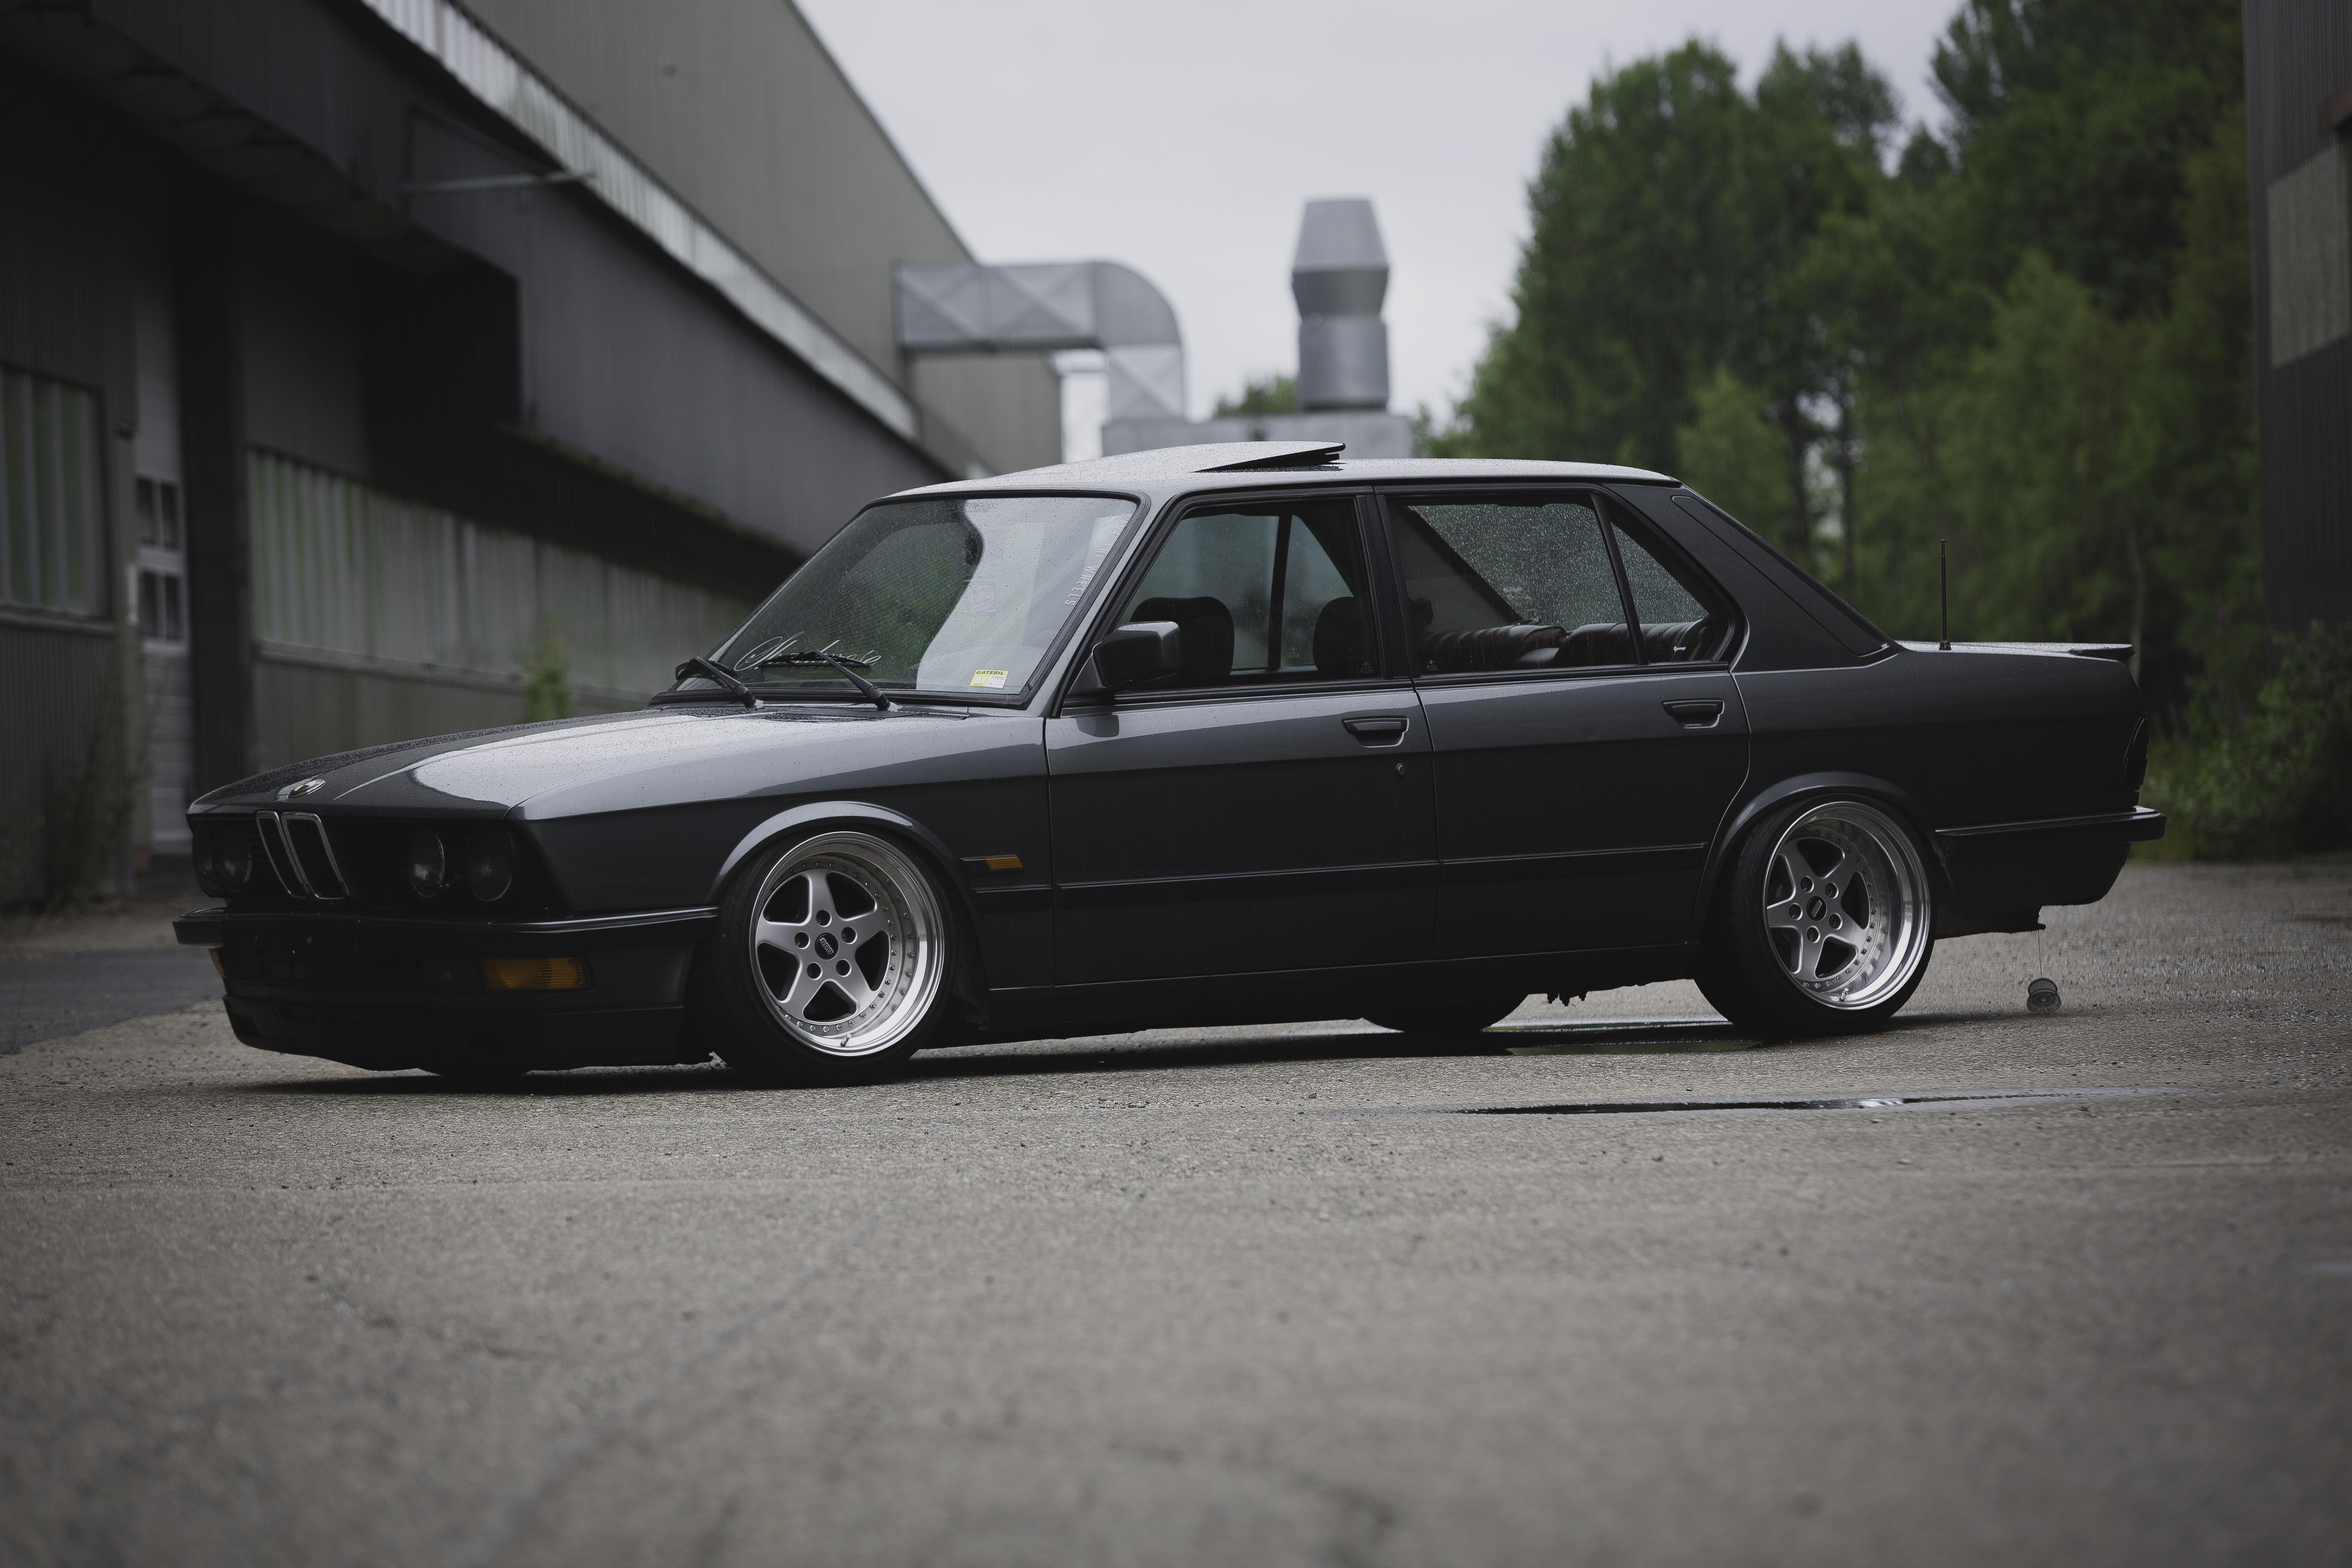 HD wallpaper, Bmw, Low Car, Summer, Bmw 5 Series, Save The Wheels, Car, Old School Wheels, Vehicle, Stanceworks, Static, Bmw E28, Black Cars, Norway